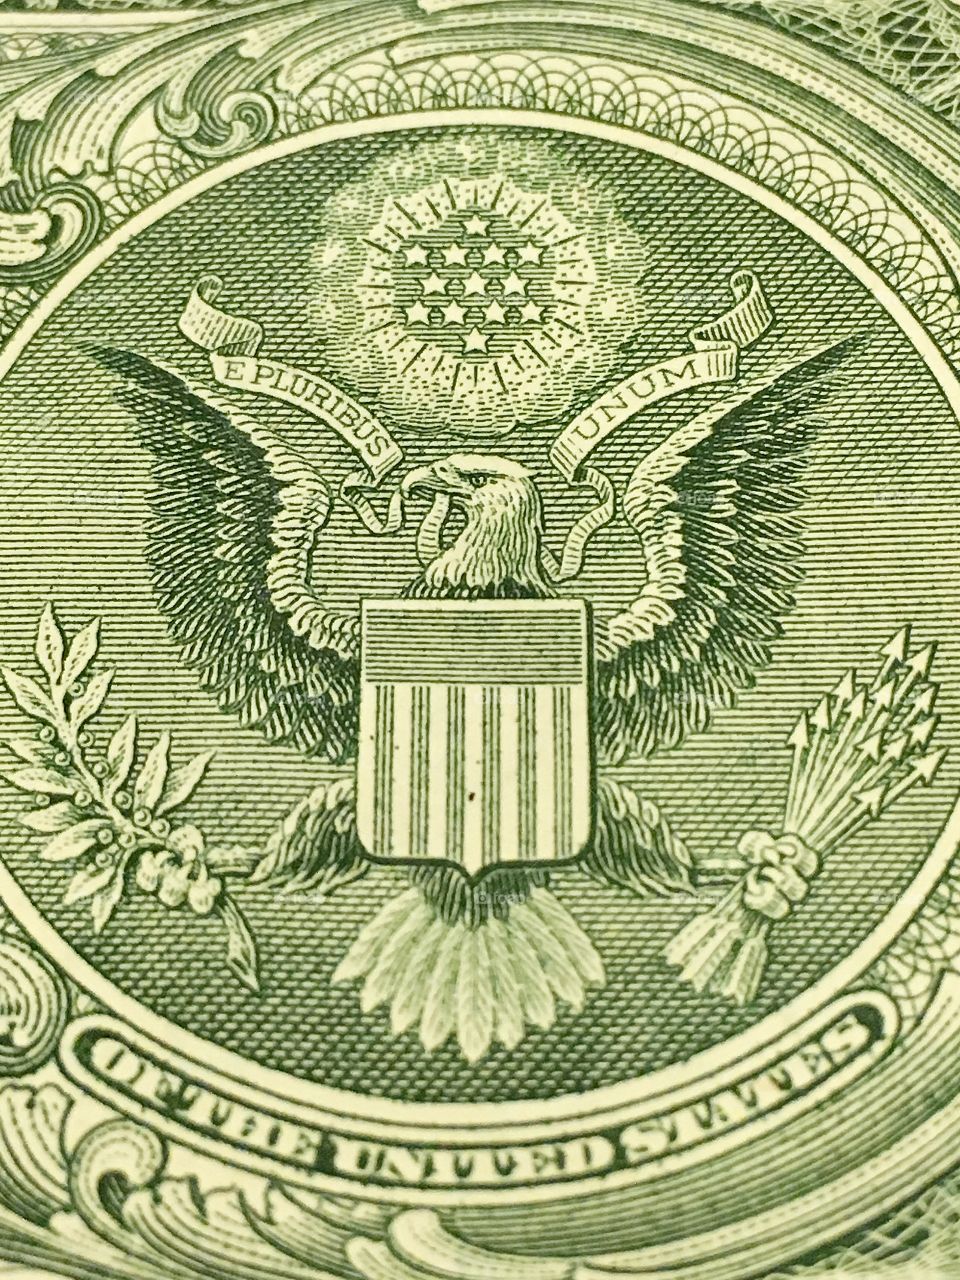 Currency closeup.  